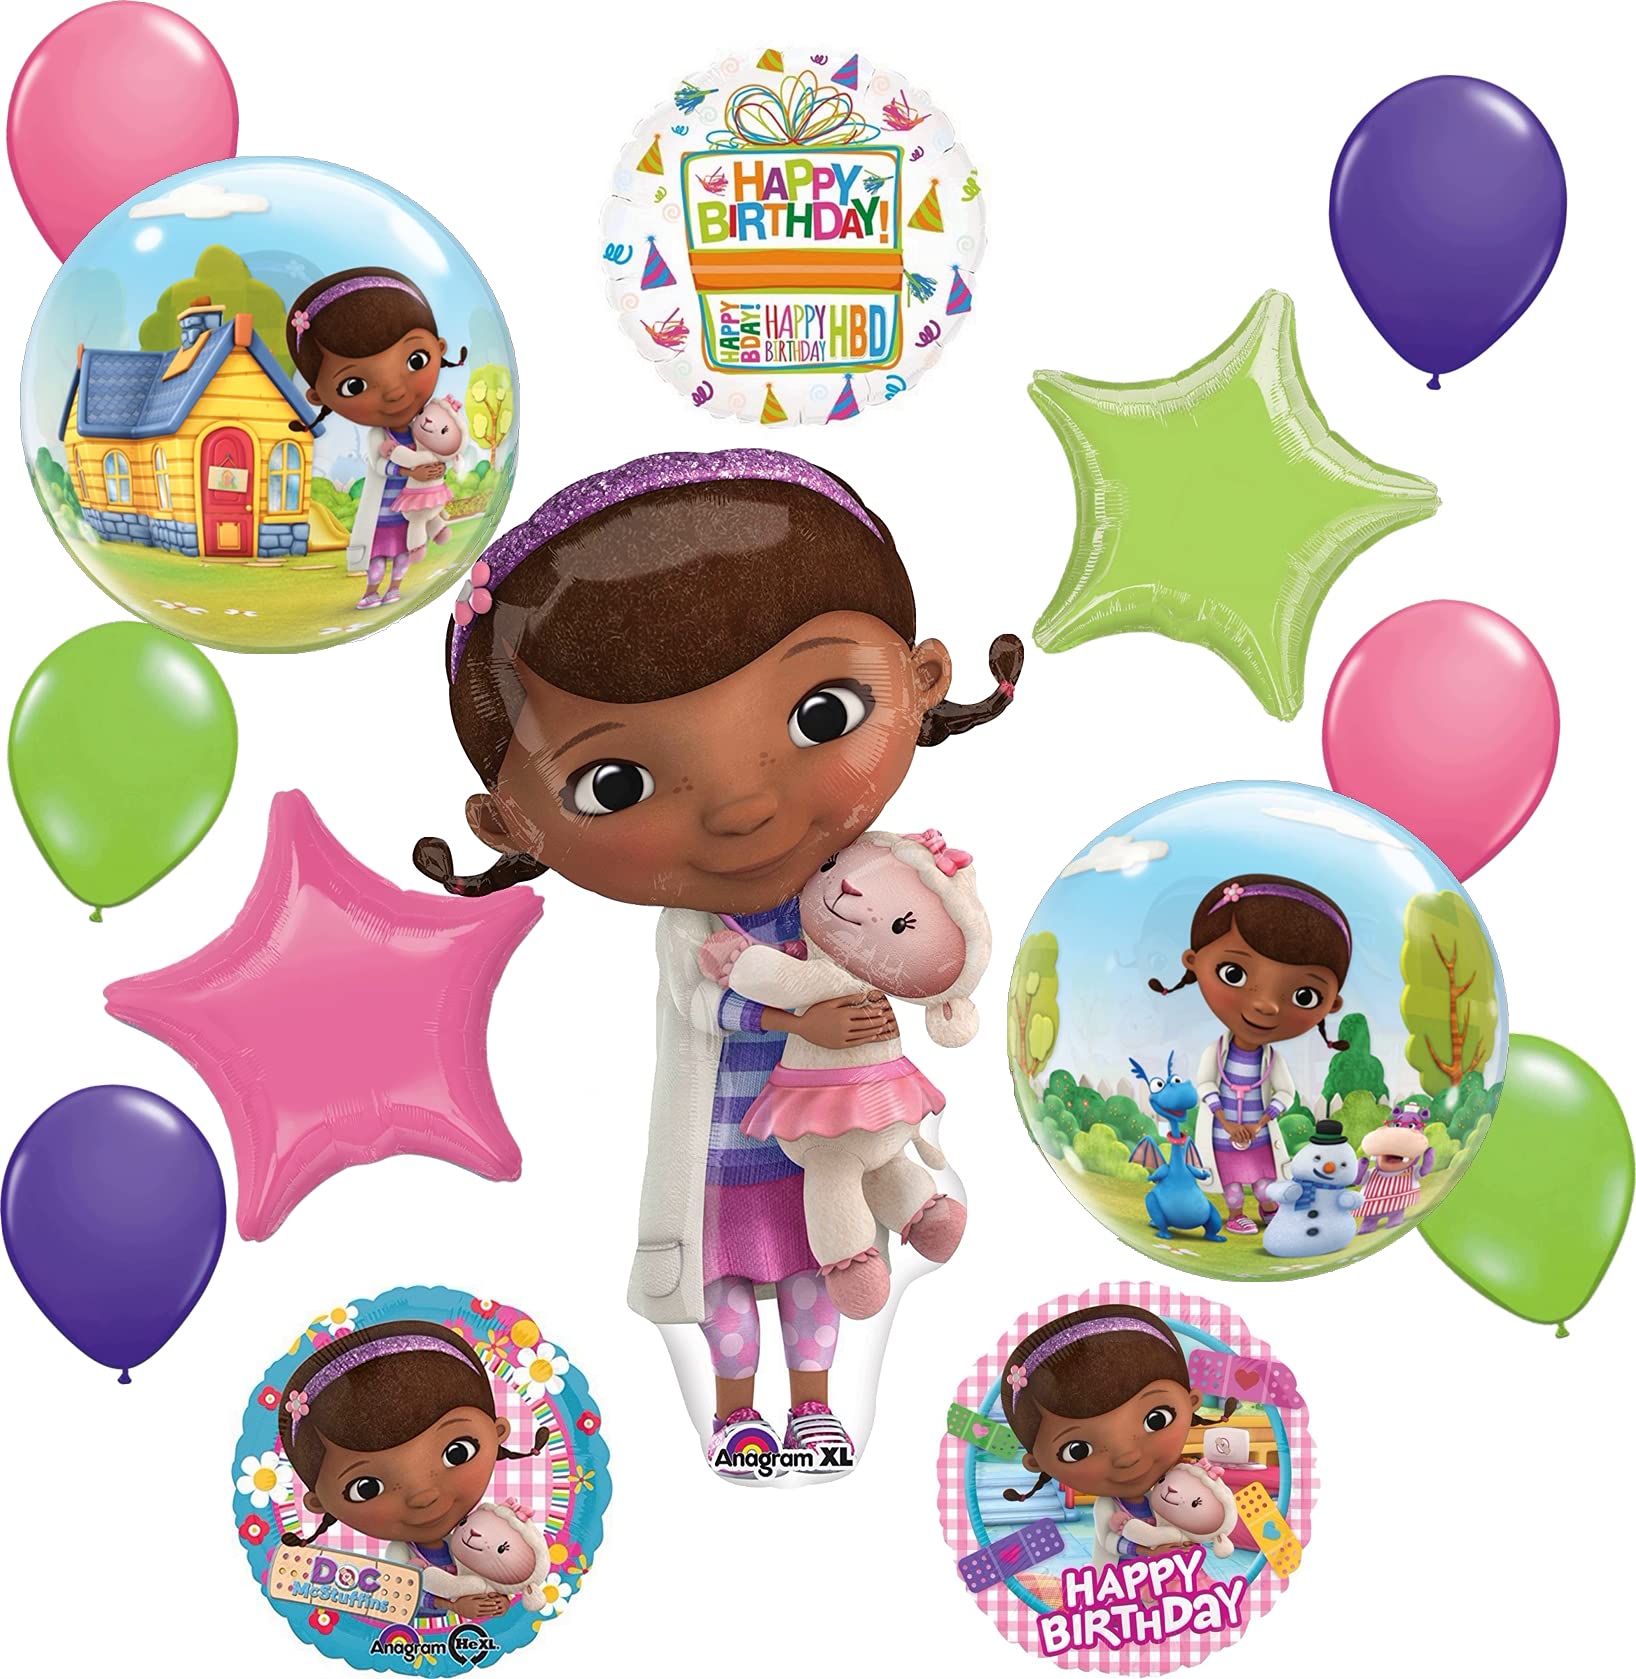 Mayflower Products Doc McStuffins party supplies Ultimate Birthday Balloon Bouquet Decorations